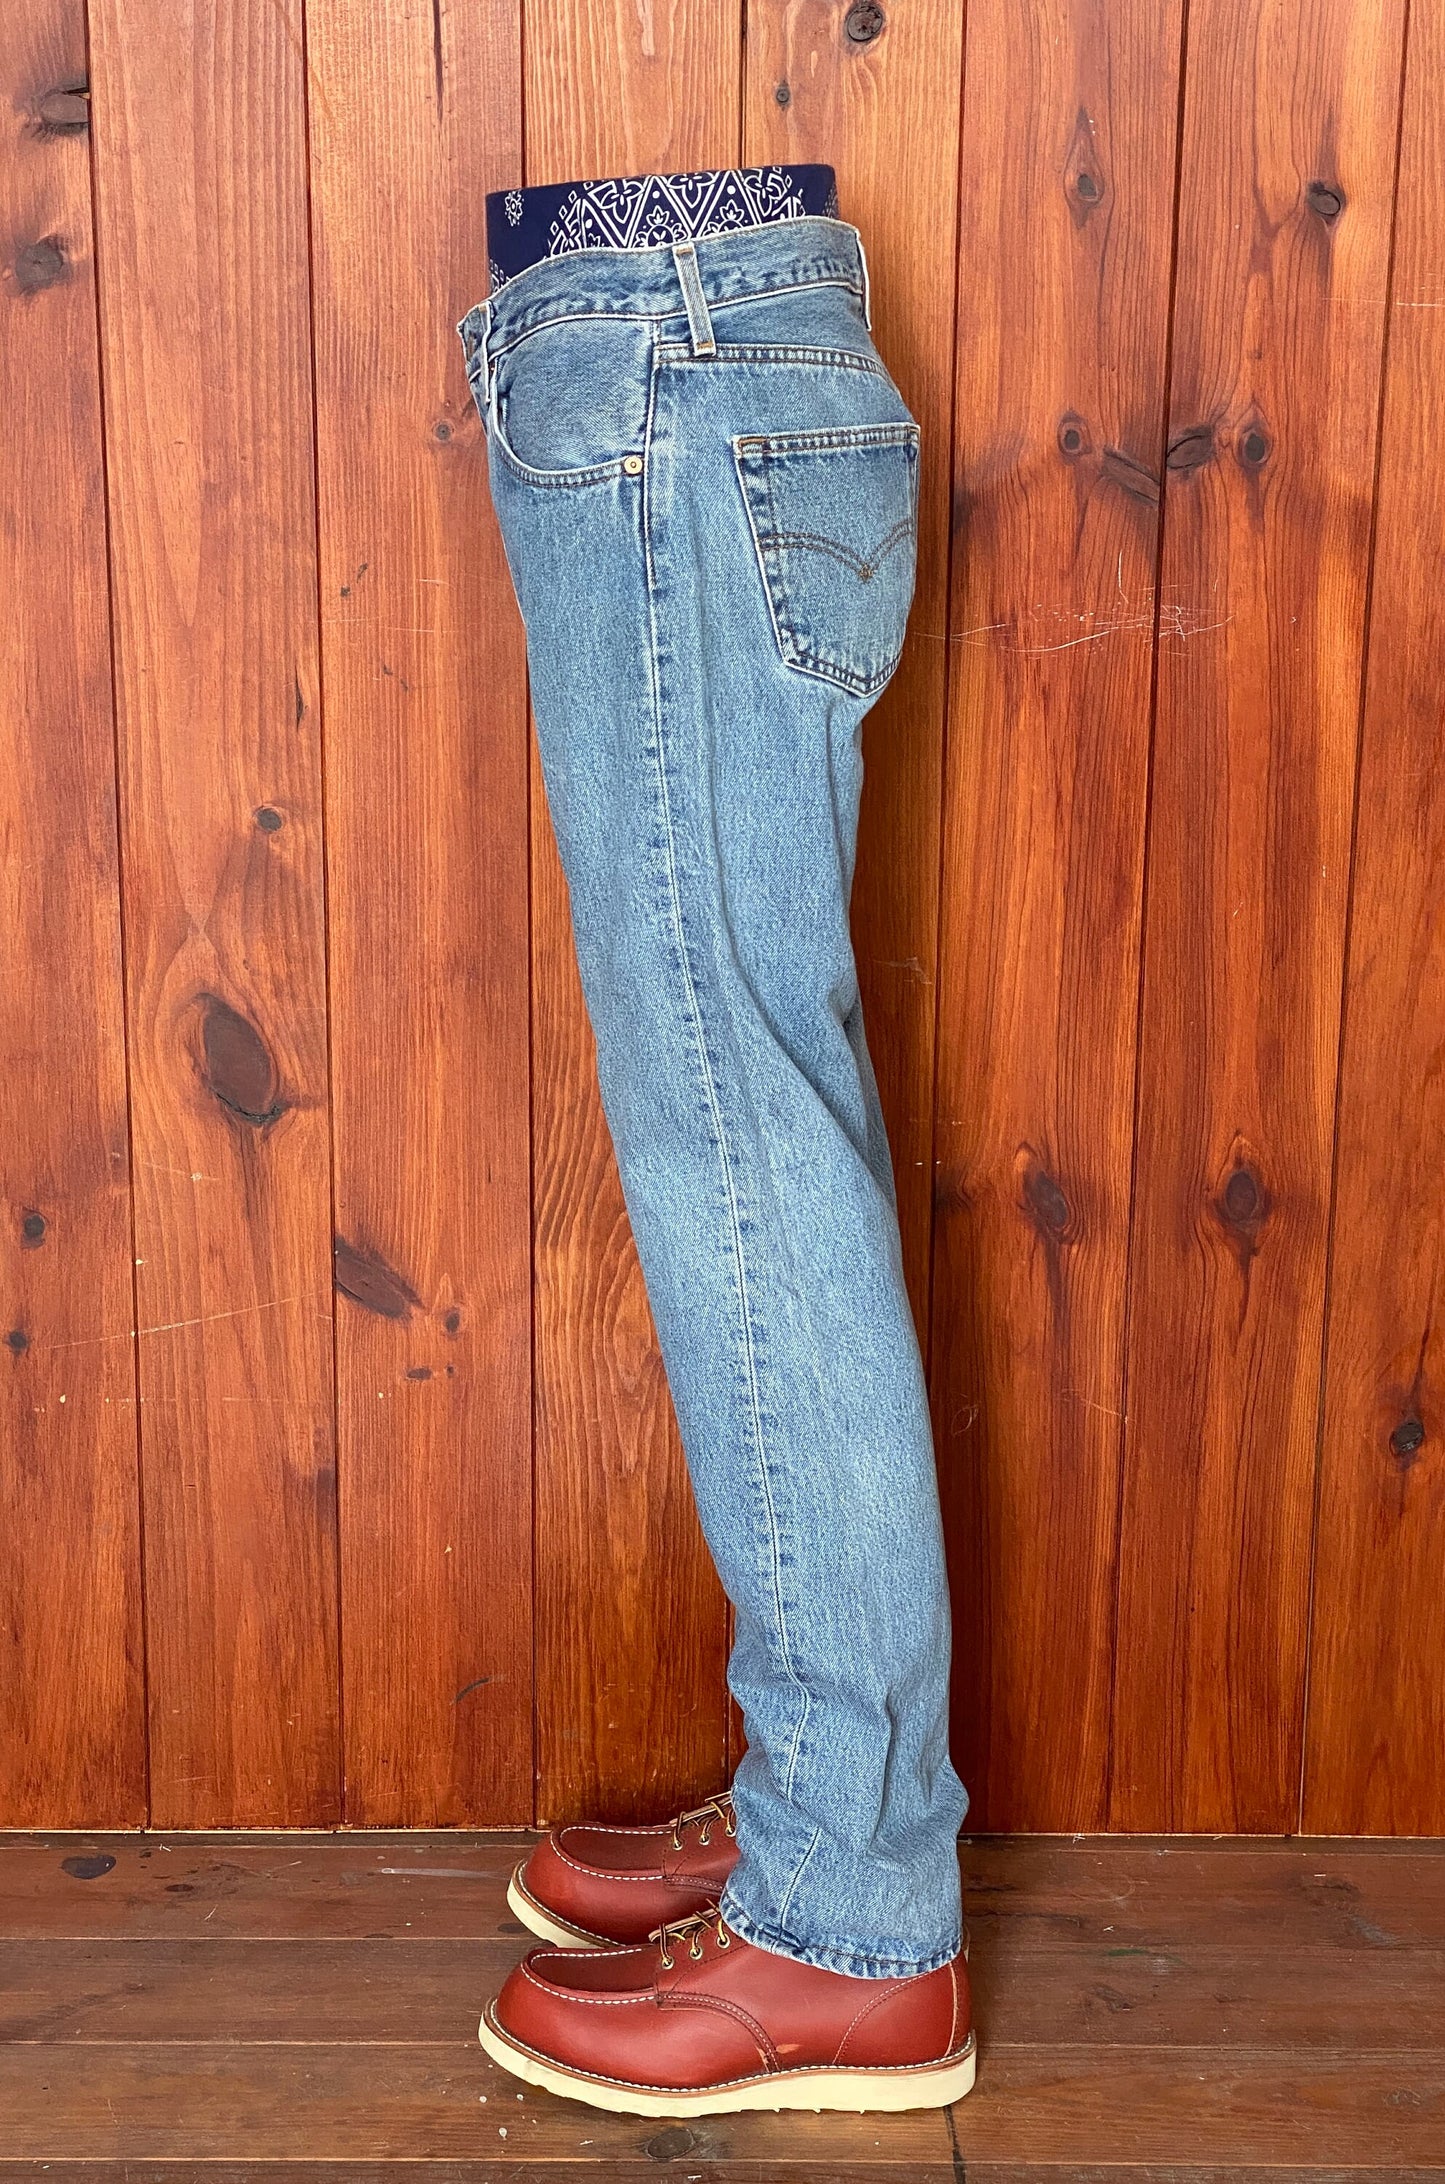 Levi's 501 Vintage Jeans Made In Mexico - Size 32x34 Blue